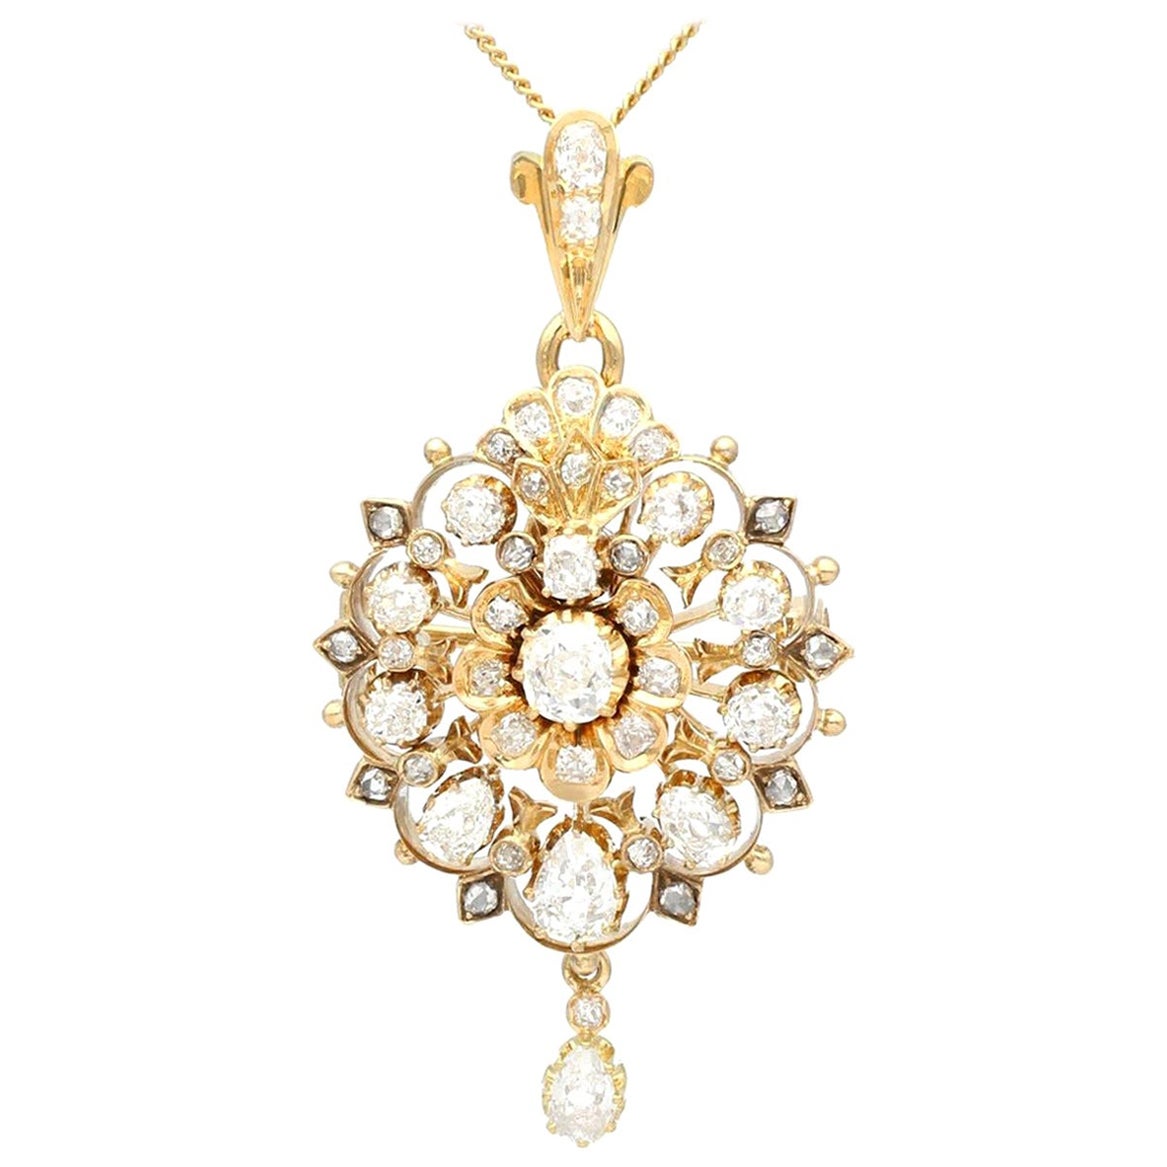 Antique 5.06 Carat Diamond and Yellow Gold Pendant or Brooch